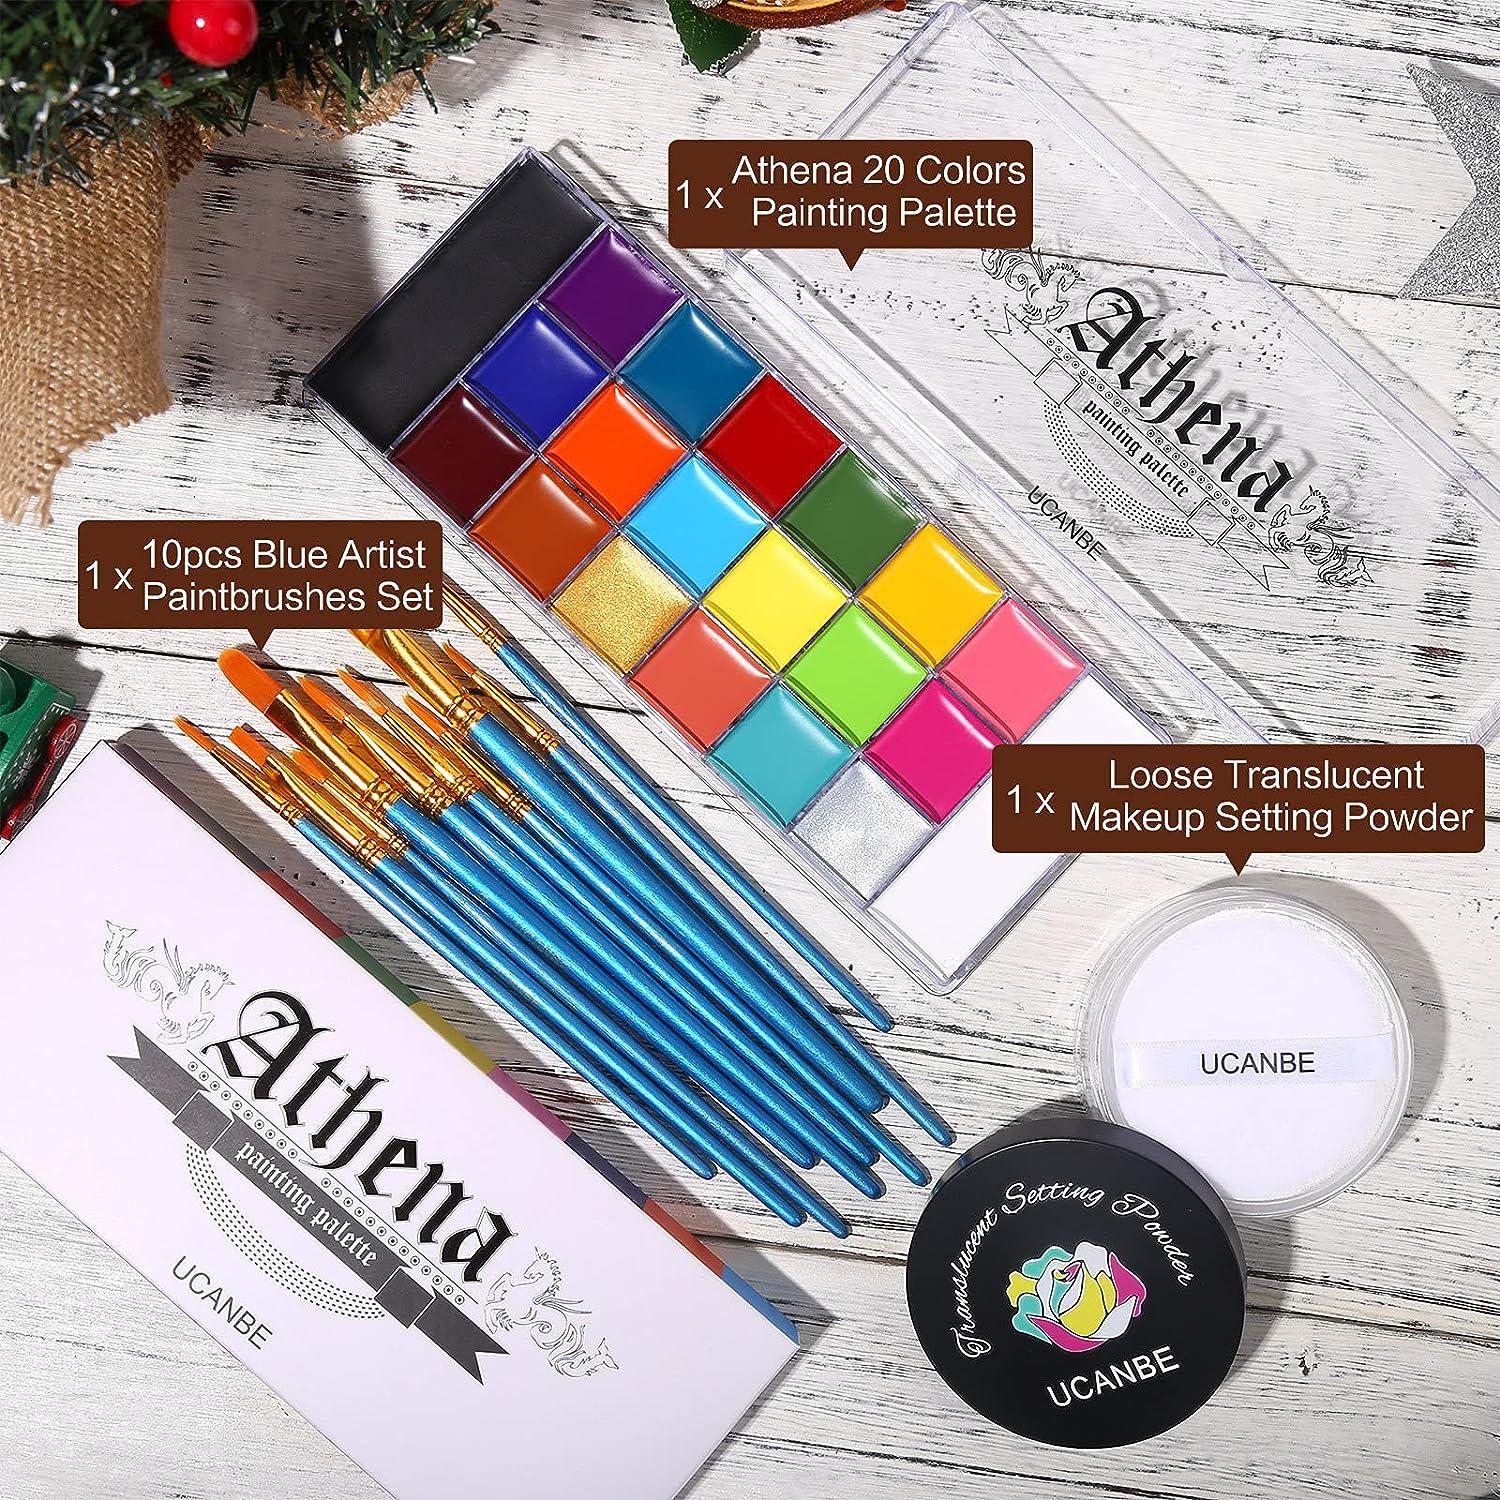 Athena Face Painting palette from